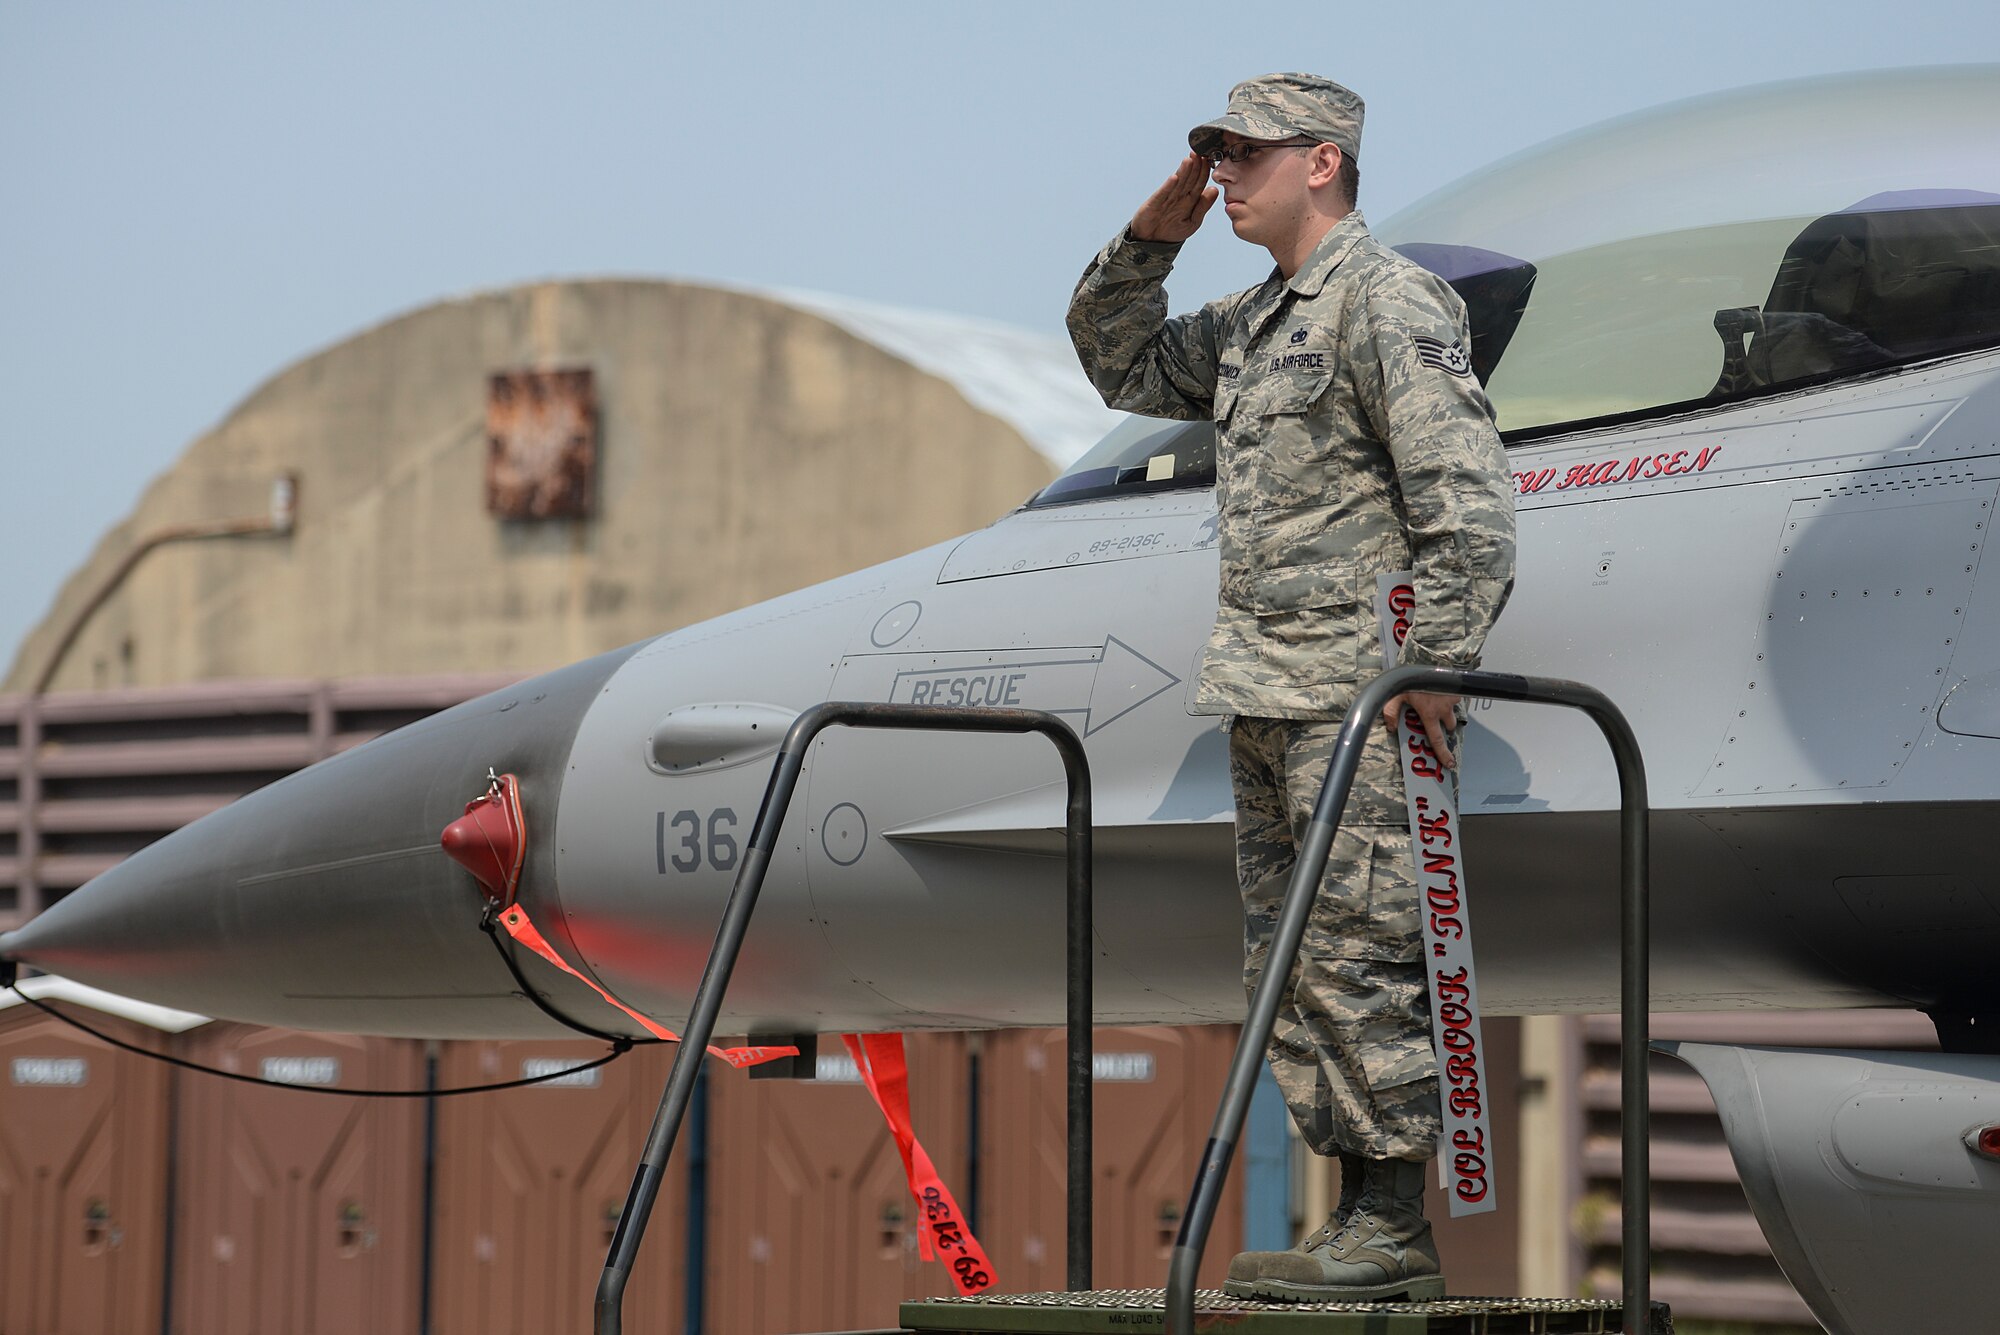 Staff Sgt. Patrick McCormick, 51st Aircraft Maintenance Squadron dedicated crew chief, salutes the new 51st Fighter Wing commander during the 51st FW Change of Command ceremony, June 16, 2015, at Osan Air Base, Republic of Korea. The Change of Command ceremony is a military tradition that represents a formal transfer of authority and responsibility for a unit from one commanding officer to another. (U.S. Air Force photo by Senior Airman Matthew Lancaster)